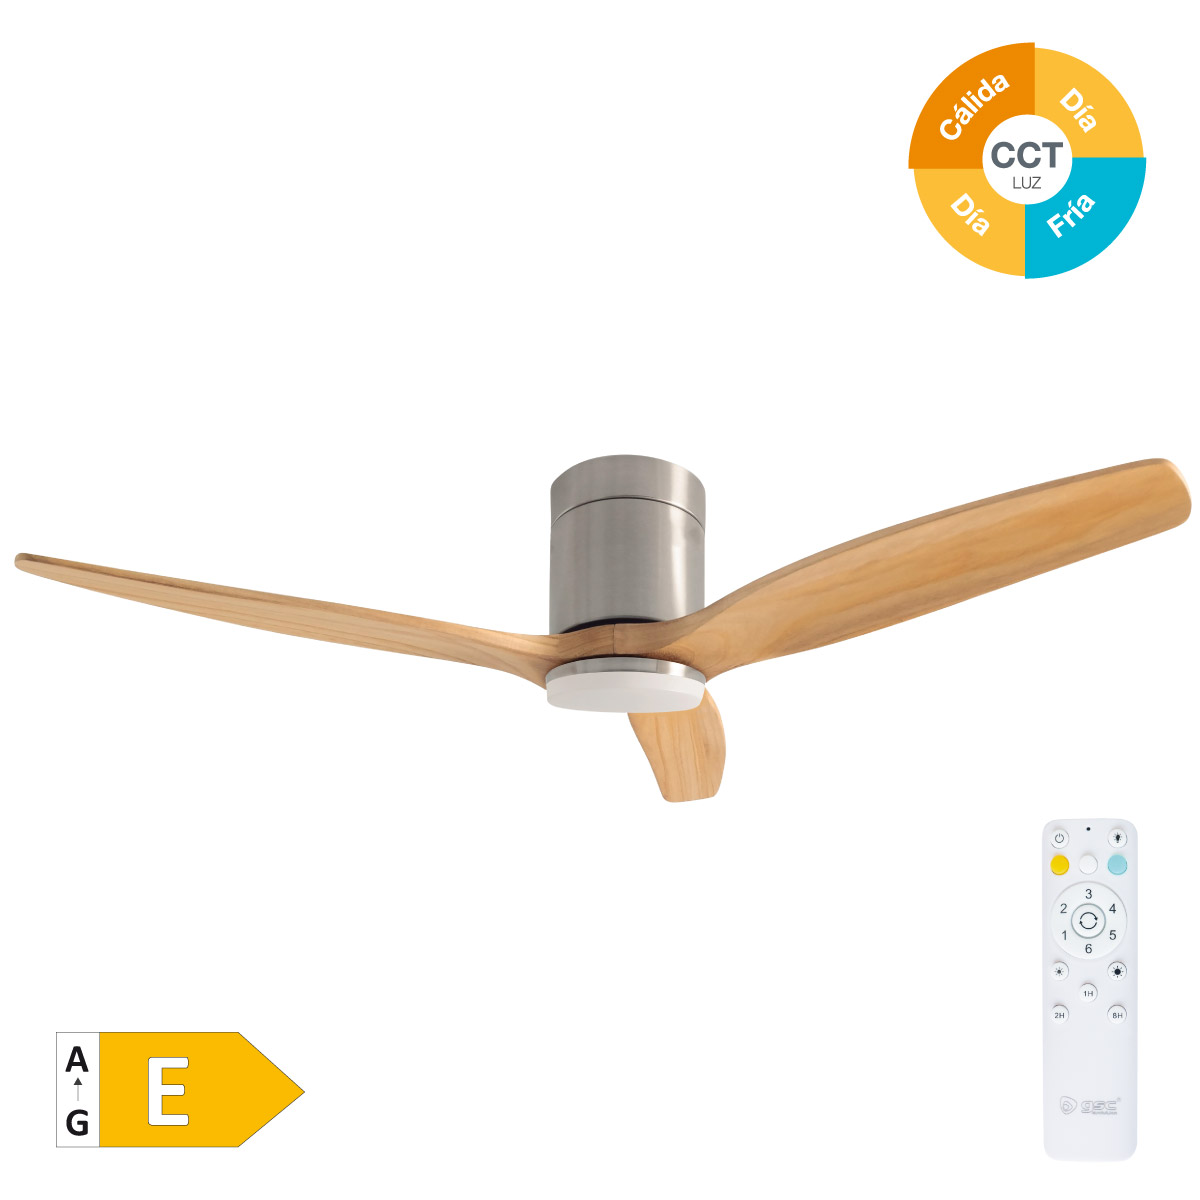 Kasama 52' DC ceiling fan with remote control CCT 3 blades dimmeable Nickel/Wood